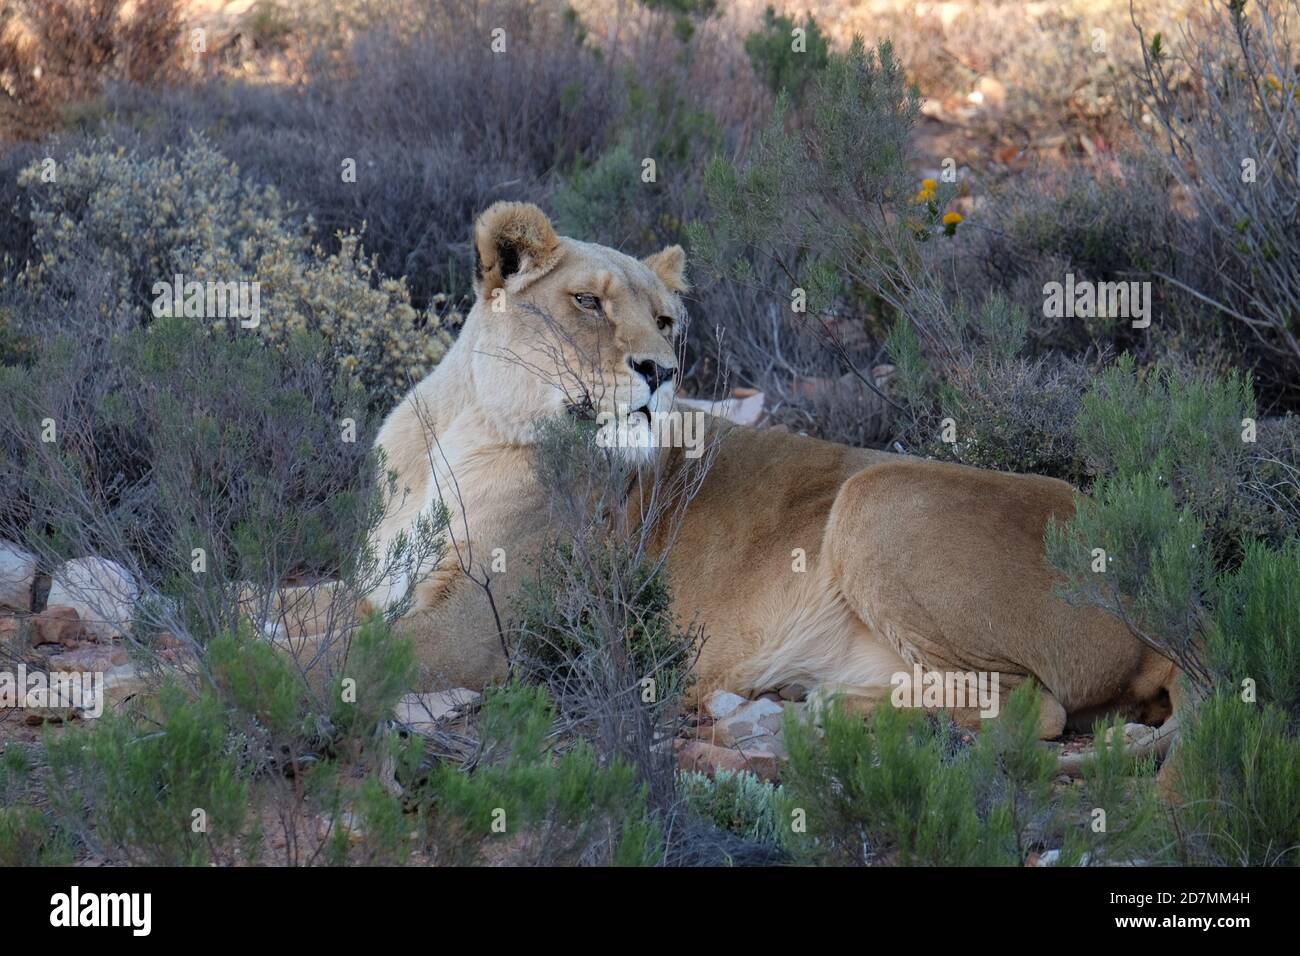 Lions in South Africa Stock Photo